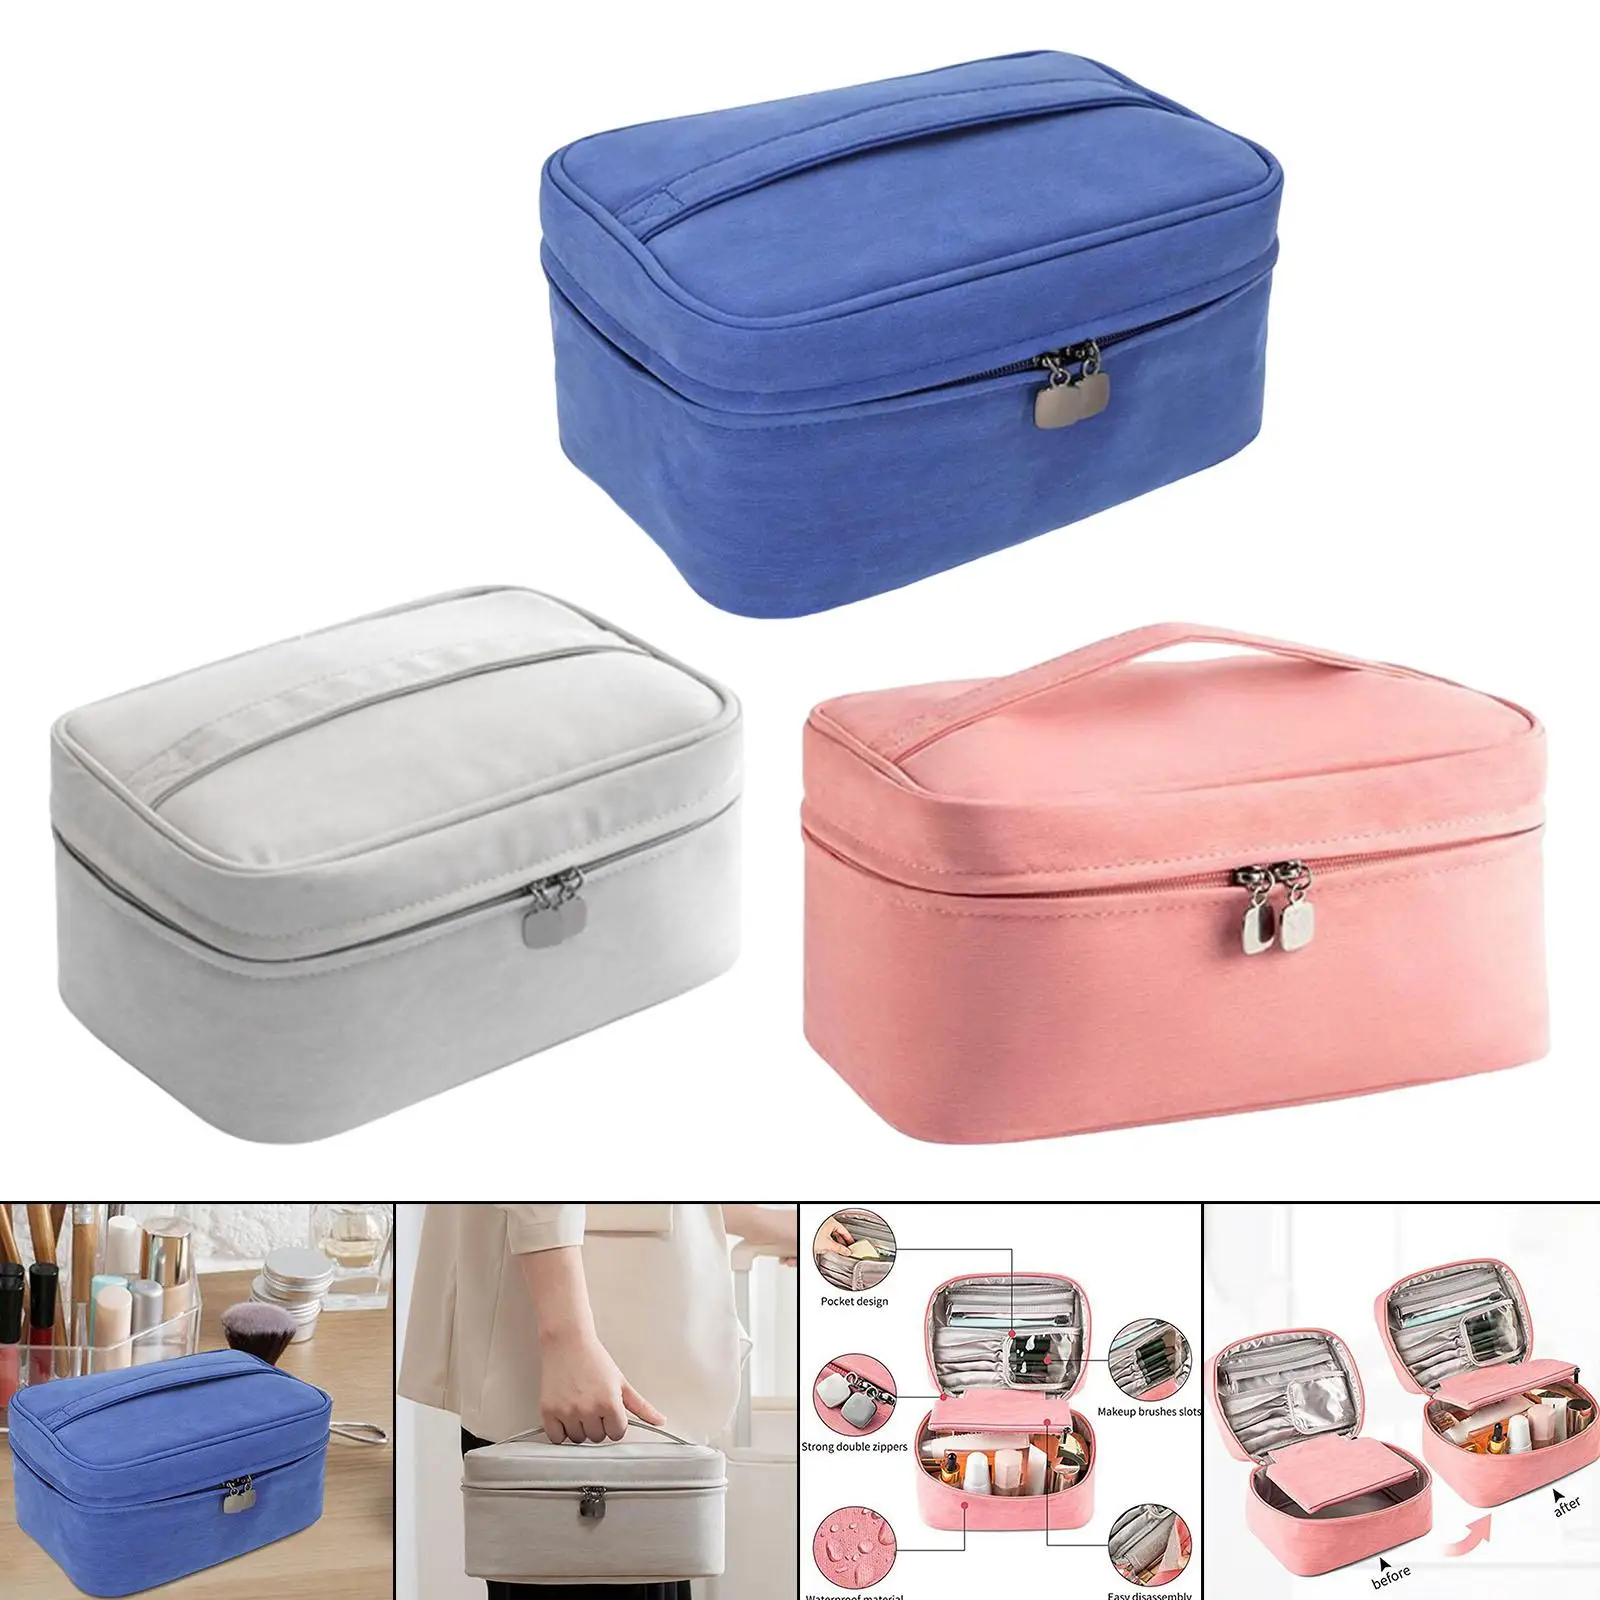 Makeup Bag with Detachable Pouch Portable with Brush Holder Pouch Make up Bag for Lip Gloss Lotion Eye Shadow Purse Beauty Eggs